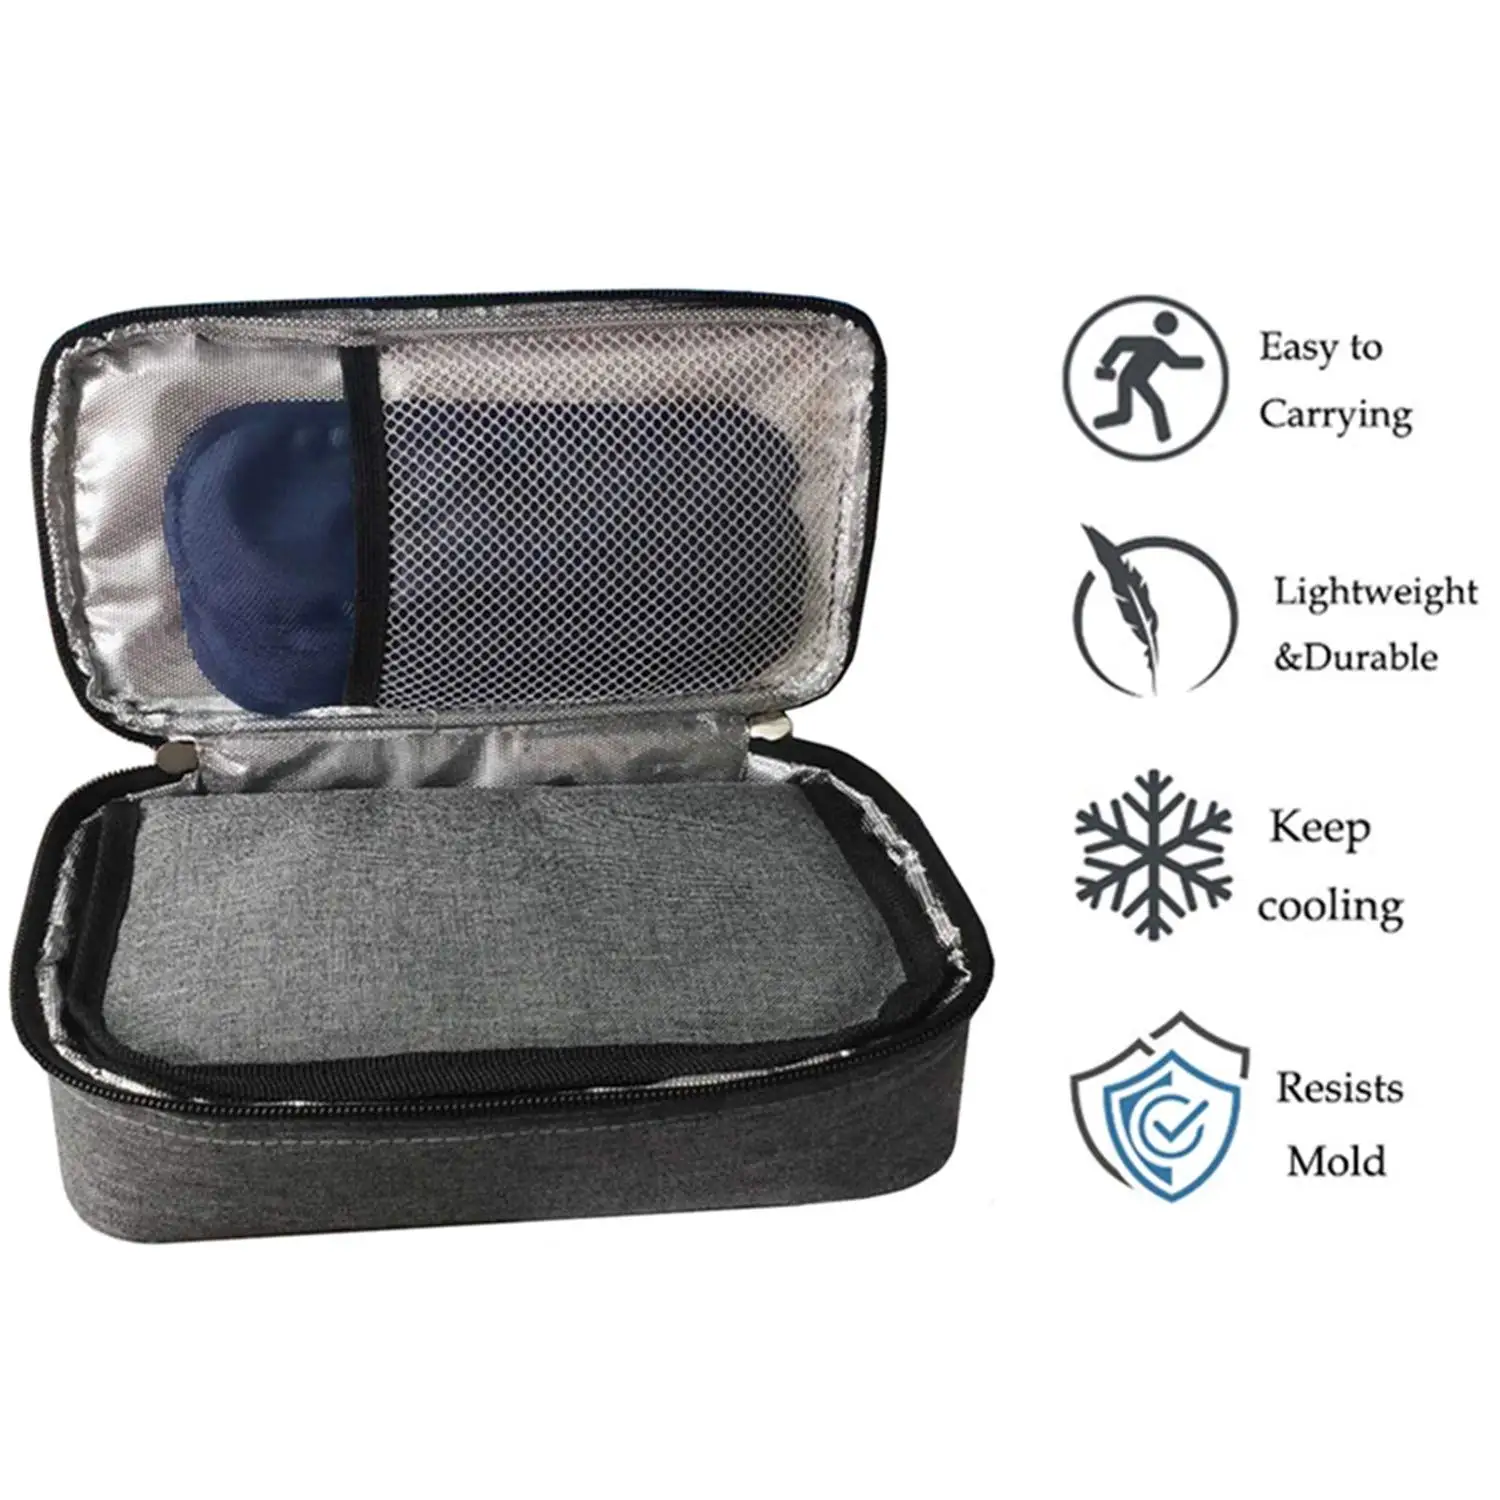 Waterproof Medical Travel Cooler Insulin Pen Case Bag Pouch With Ice ...